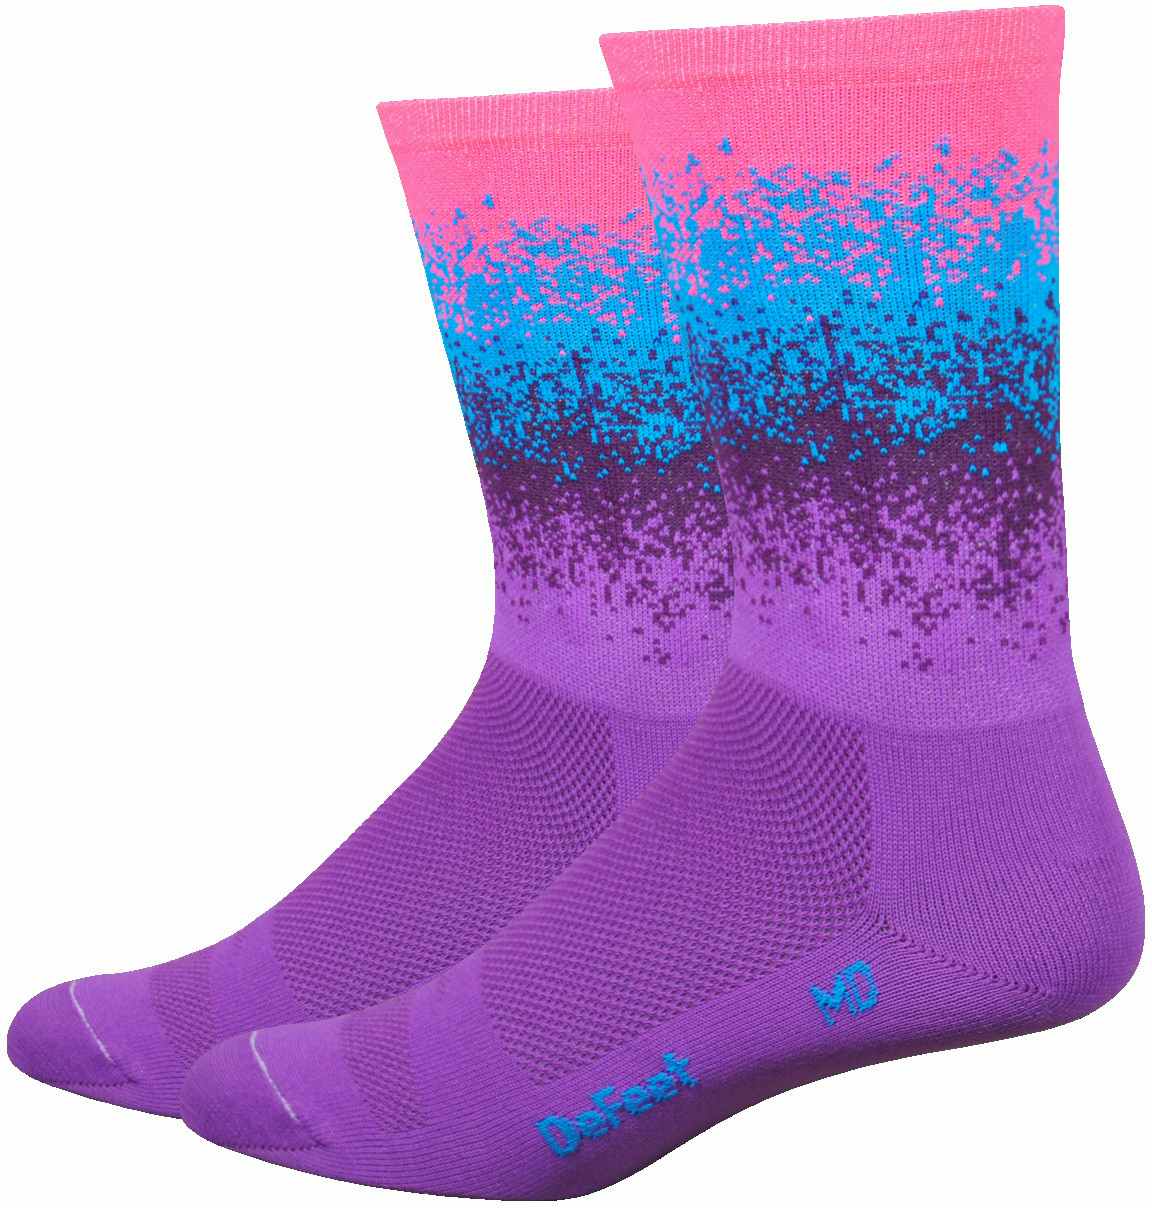 Chaussettes Aireator Barnstormer Ombre Baie/Dawson/Proc/RoseHi-V